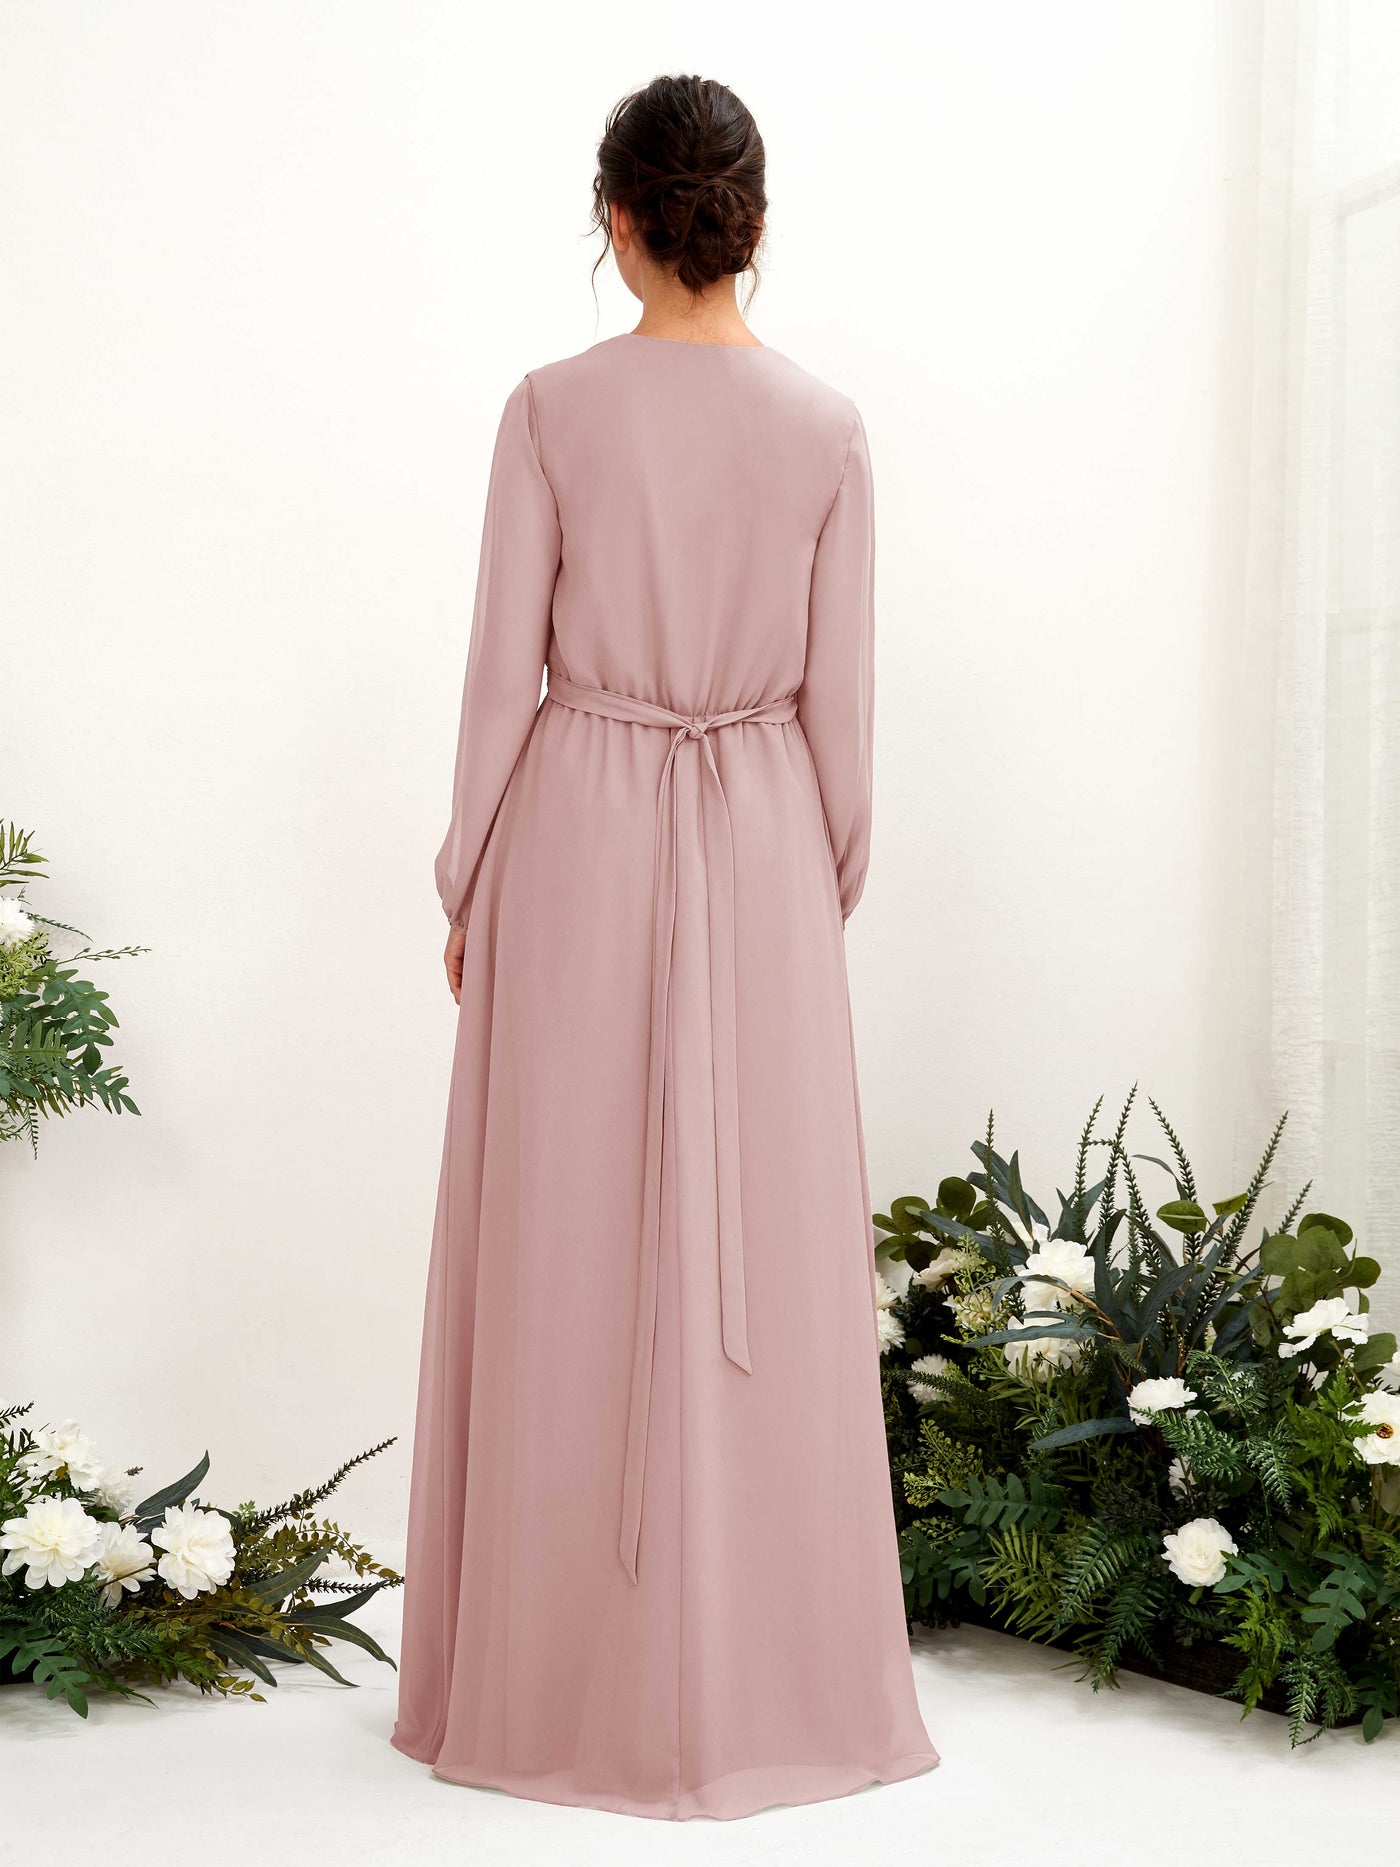 Dusty Rose Bridesmaid Dresses Bridesmaid Dress A-line Chiffon V-neck Full Length Long Sleeves Wedding Party Dress (81223209)#color_dusty-rose